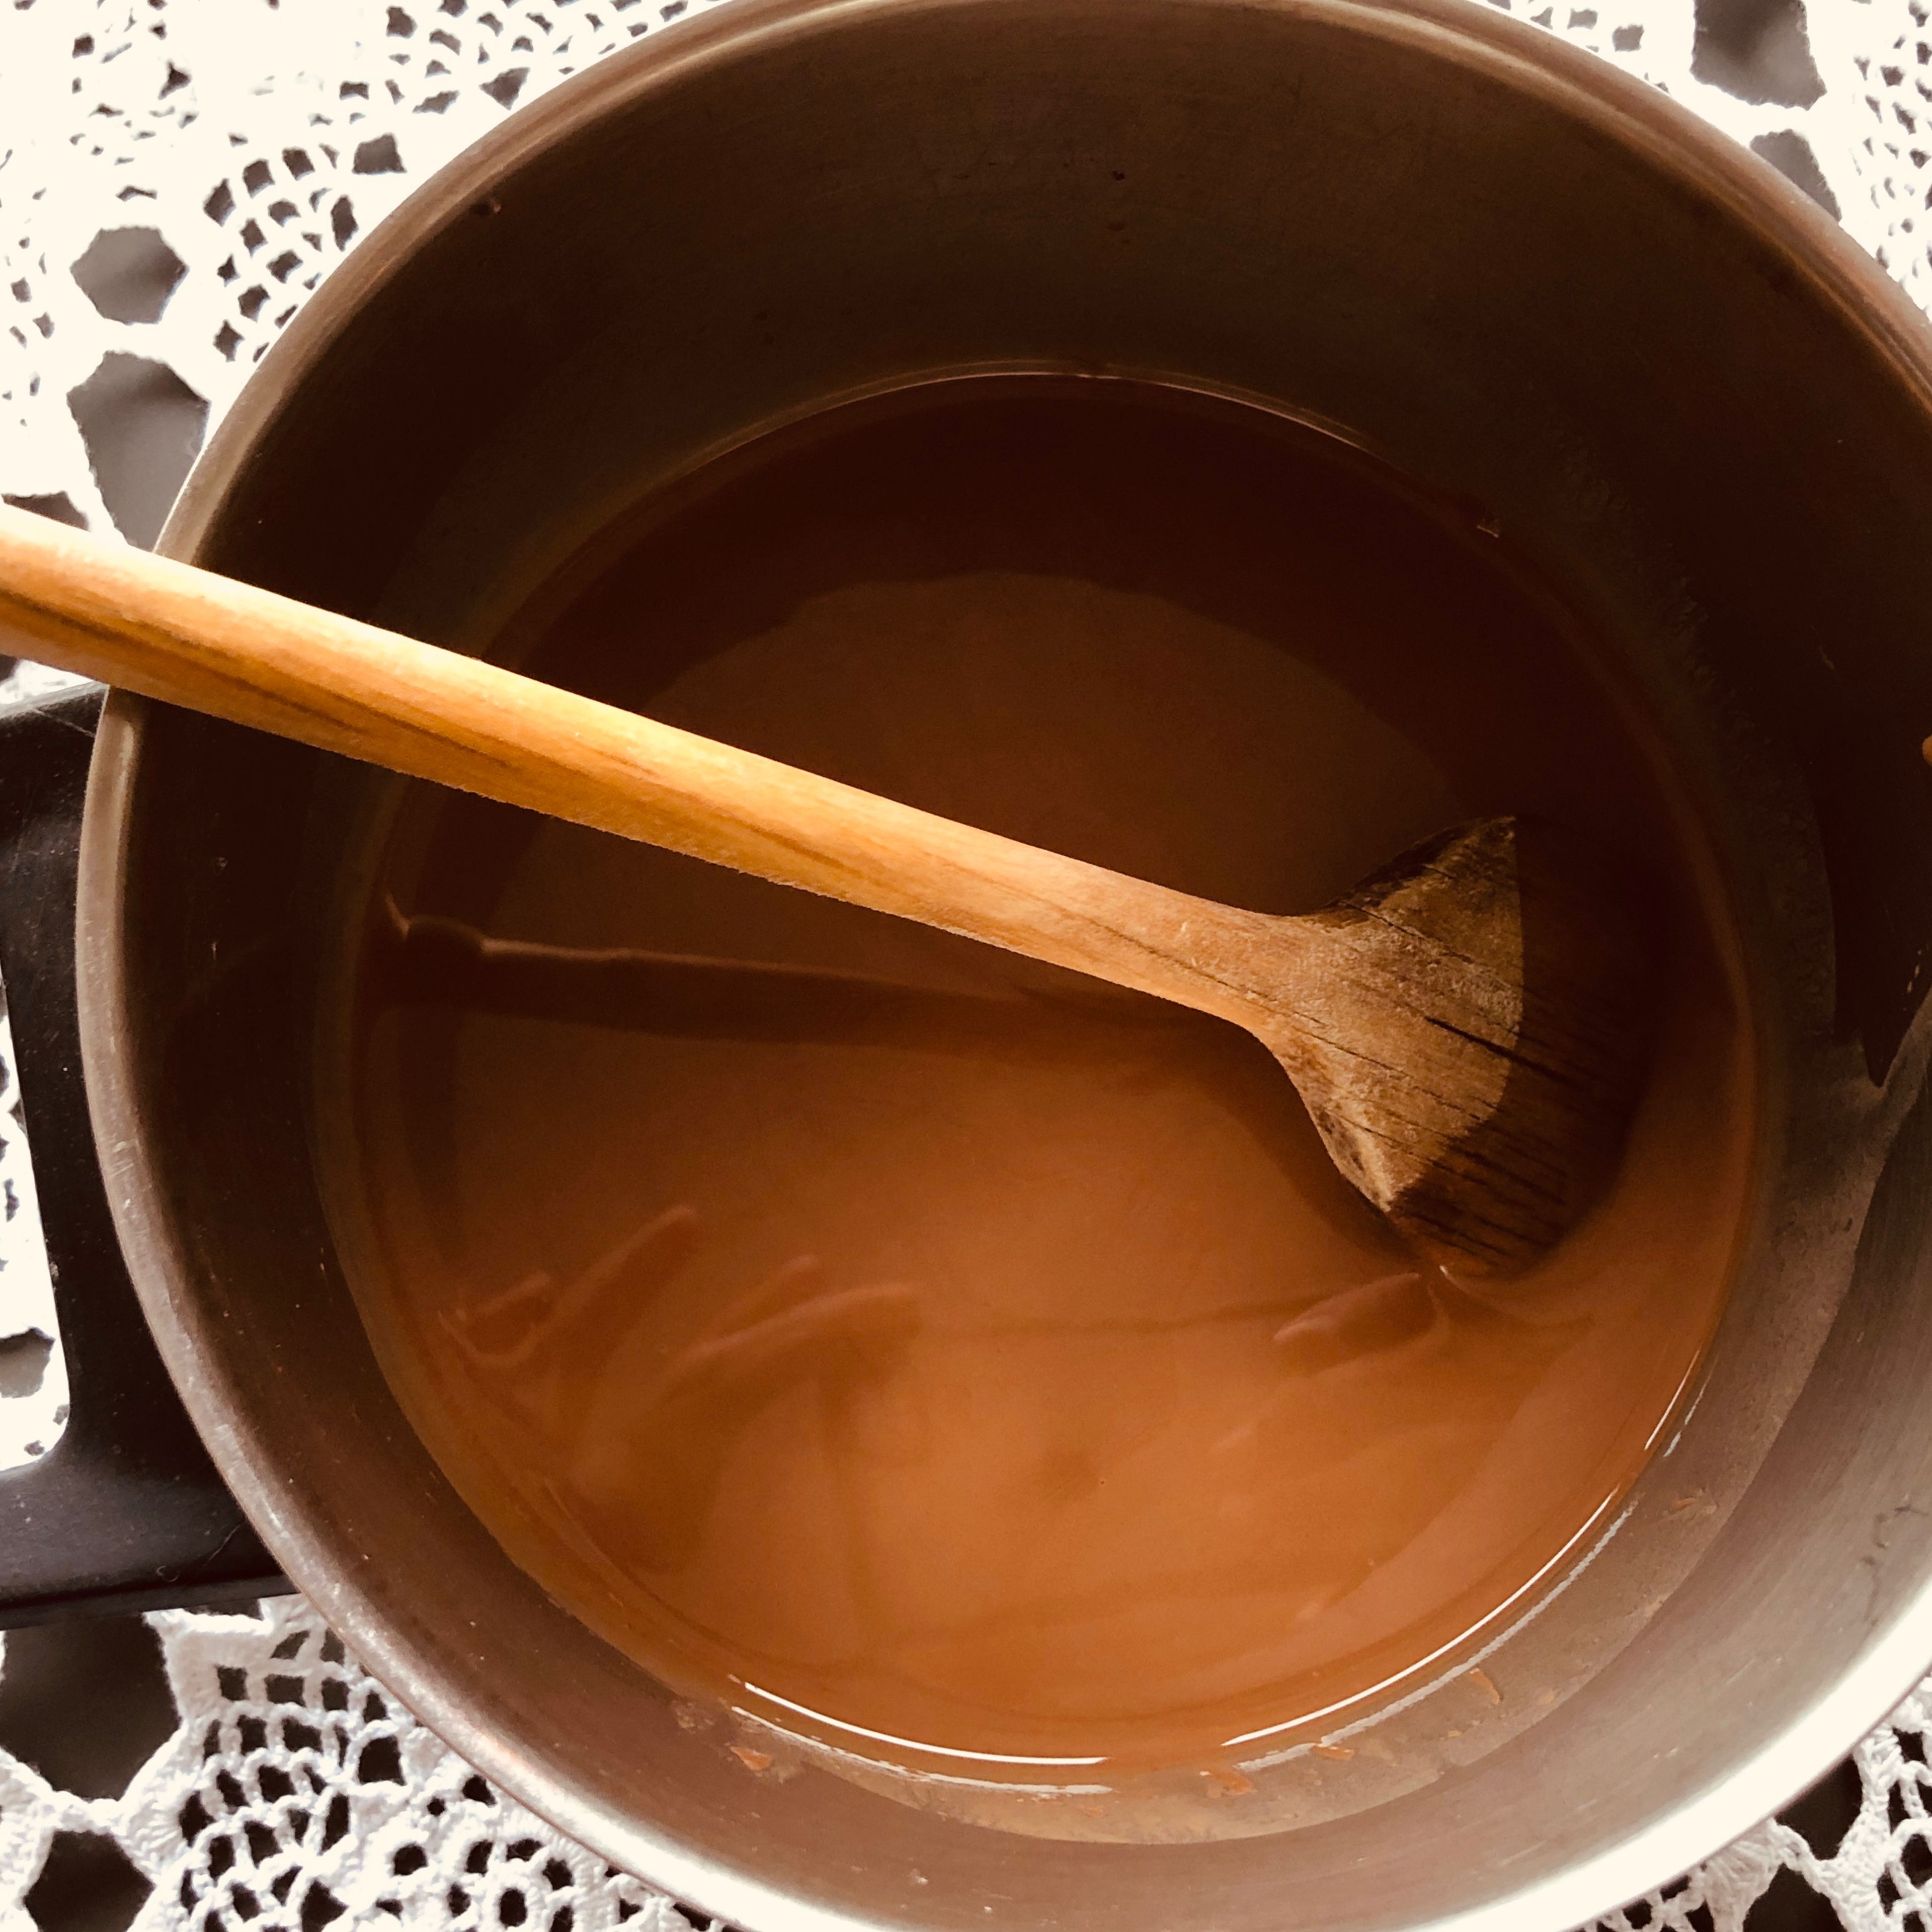 Add the coconut oil and 50 g of the chocolate chips to a small pot and heat it on low to medium heat for 2 minutes or until melted. then let sit for 2 minutes before whisking together.